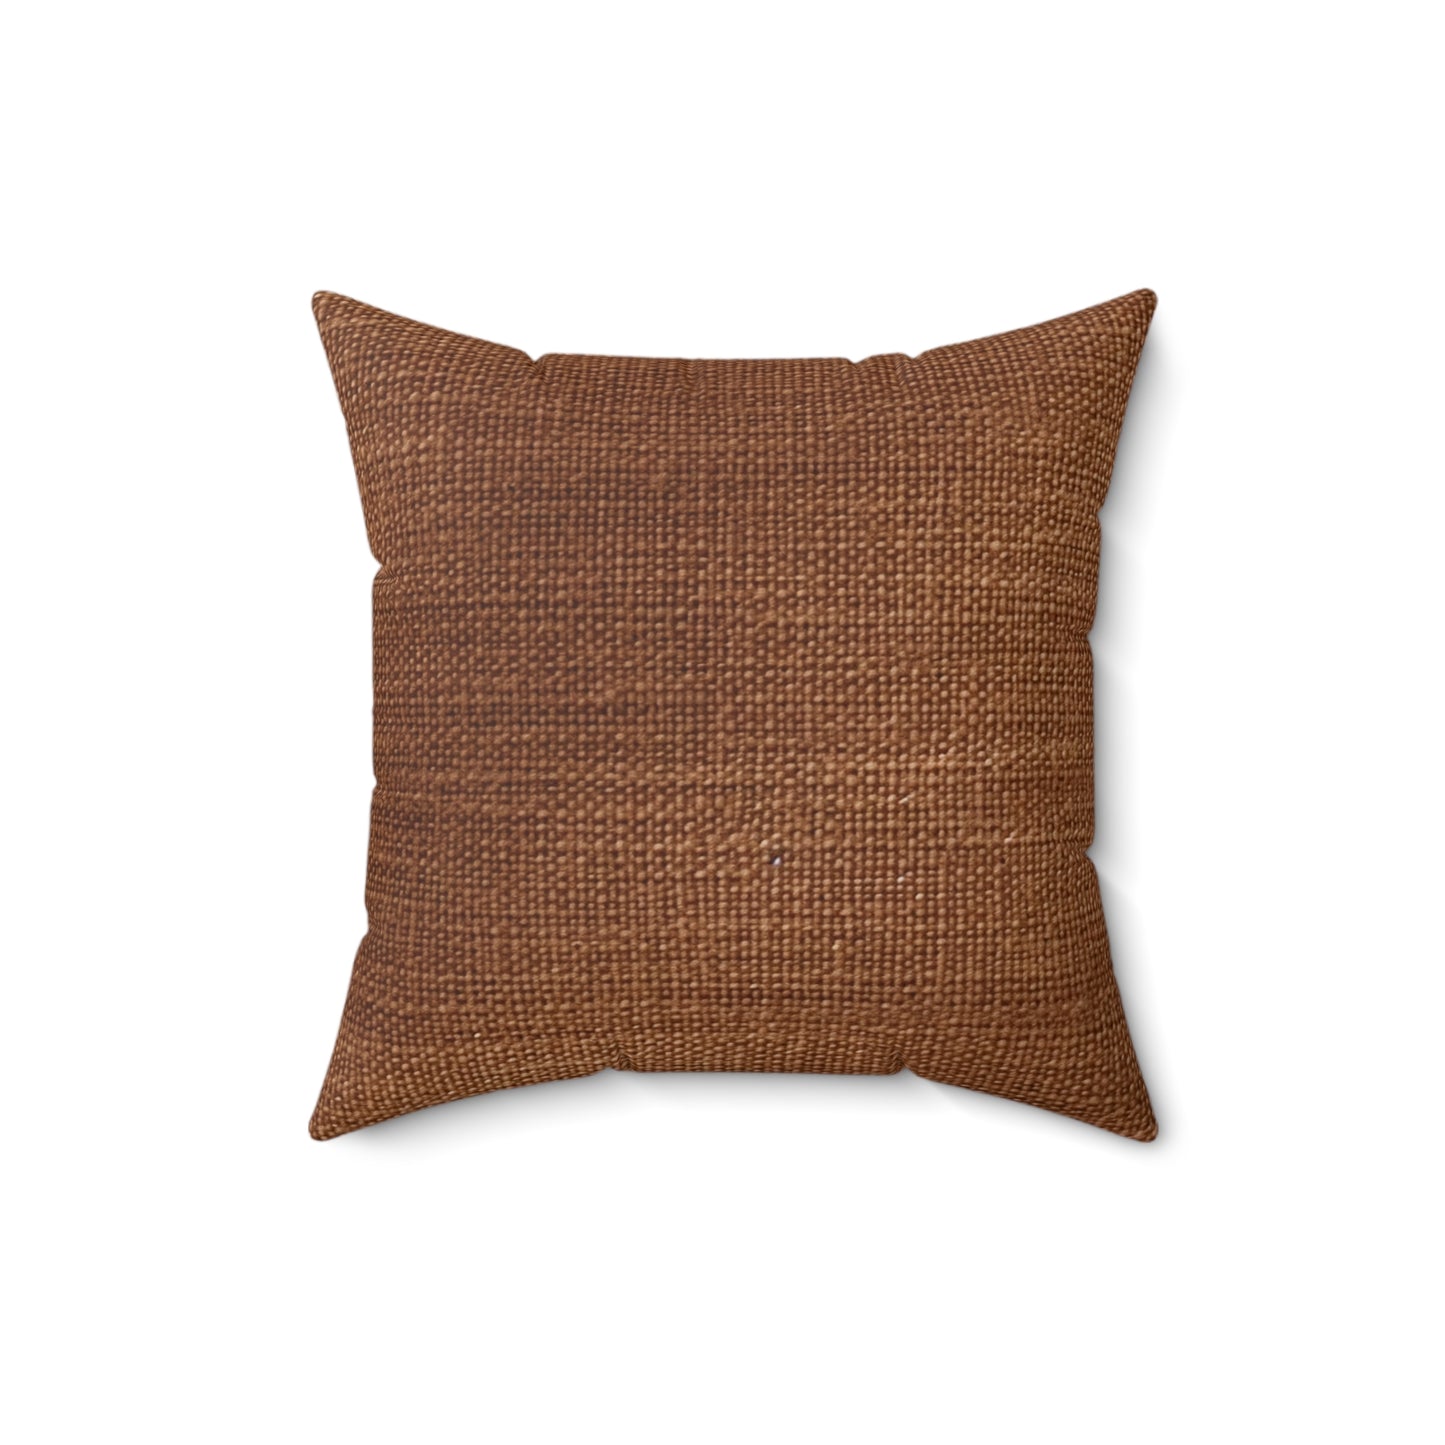 Luxe Dark Brown: Denim-Inspired, Distinctively Textured Fabric - Spun Polyester Square Pillow